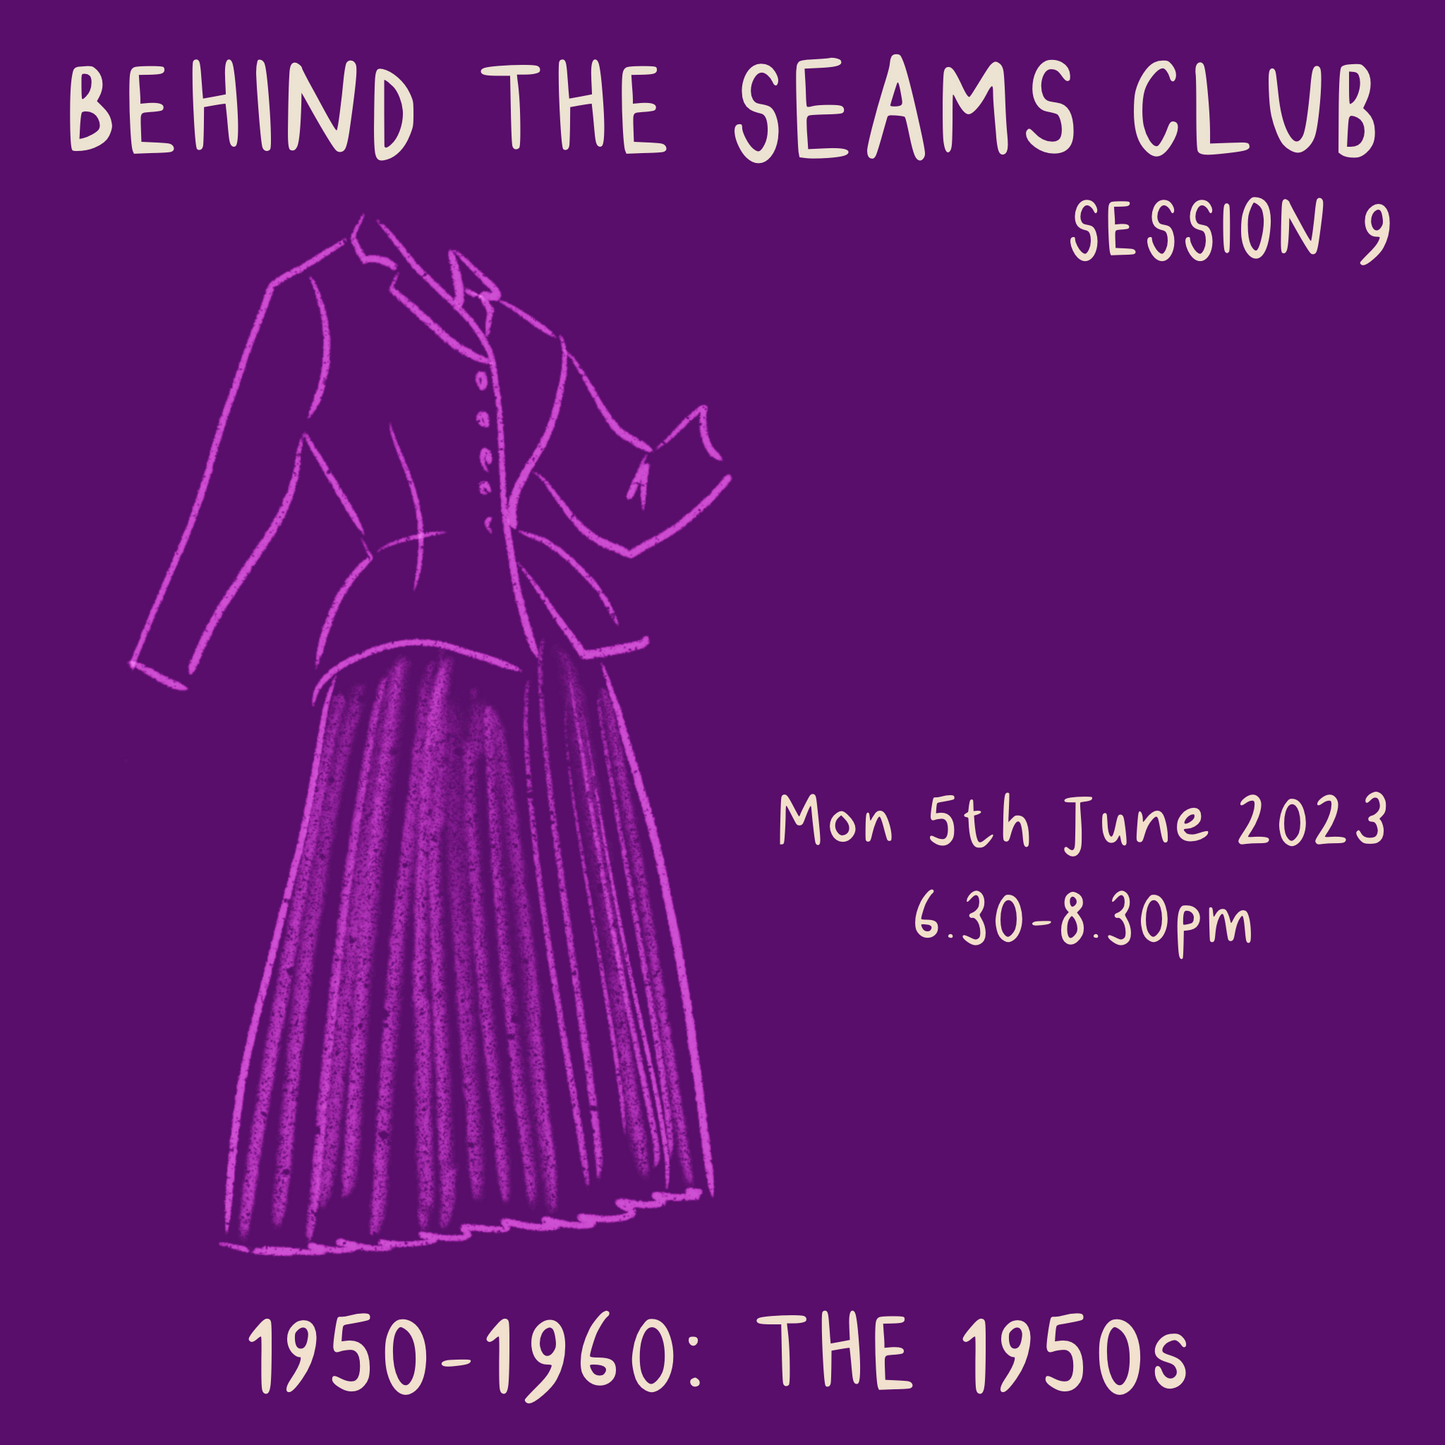 Behind The Seams Club Session 9 Mon 5th June 2023: The 1950s *DROP IN*